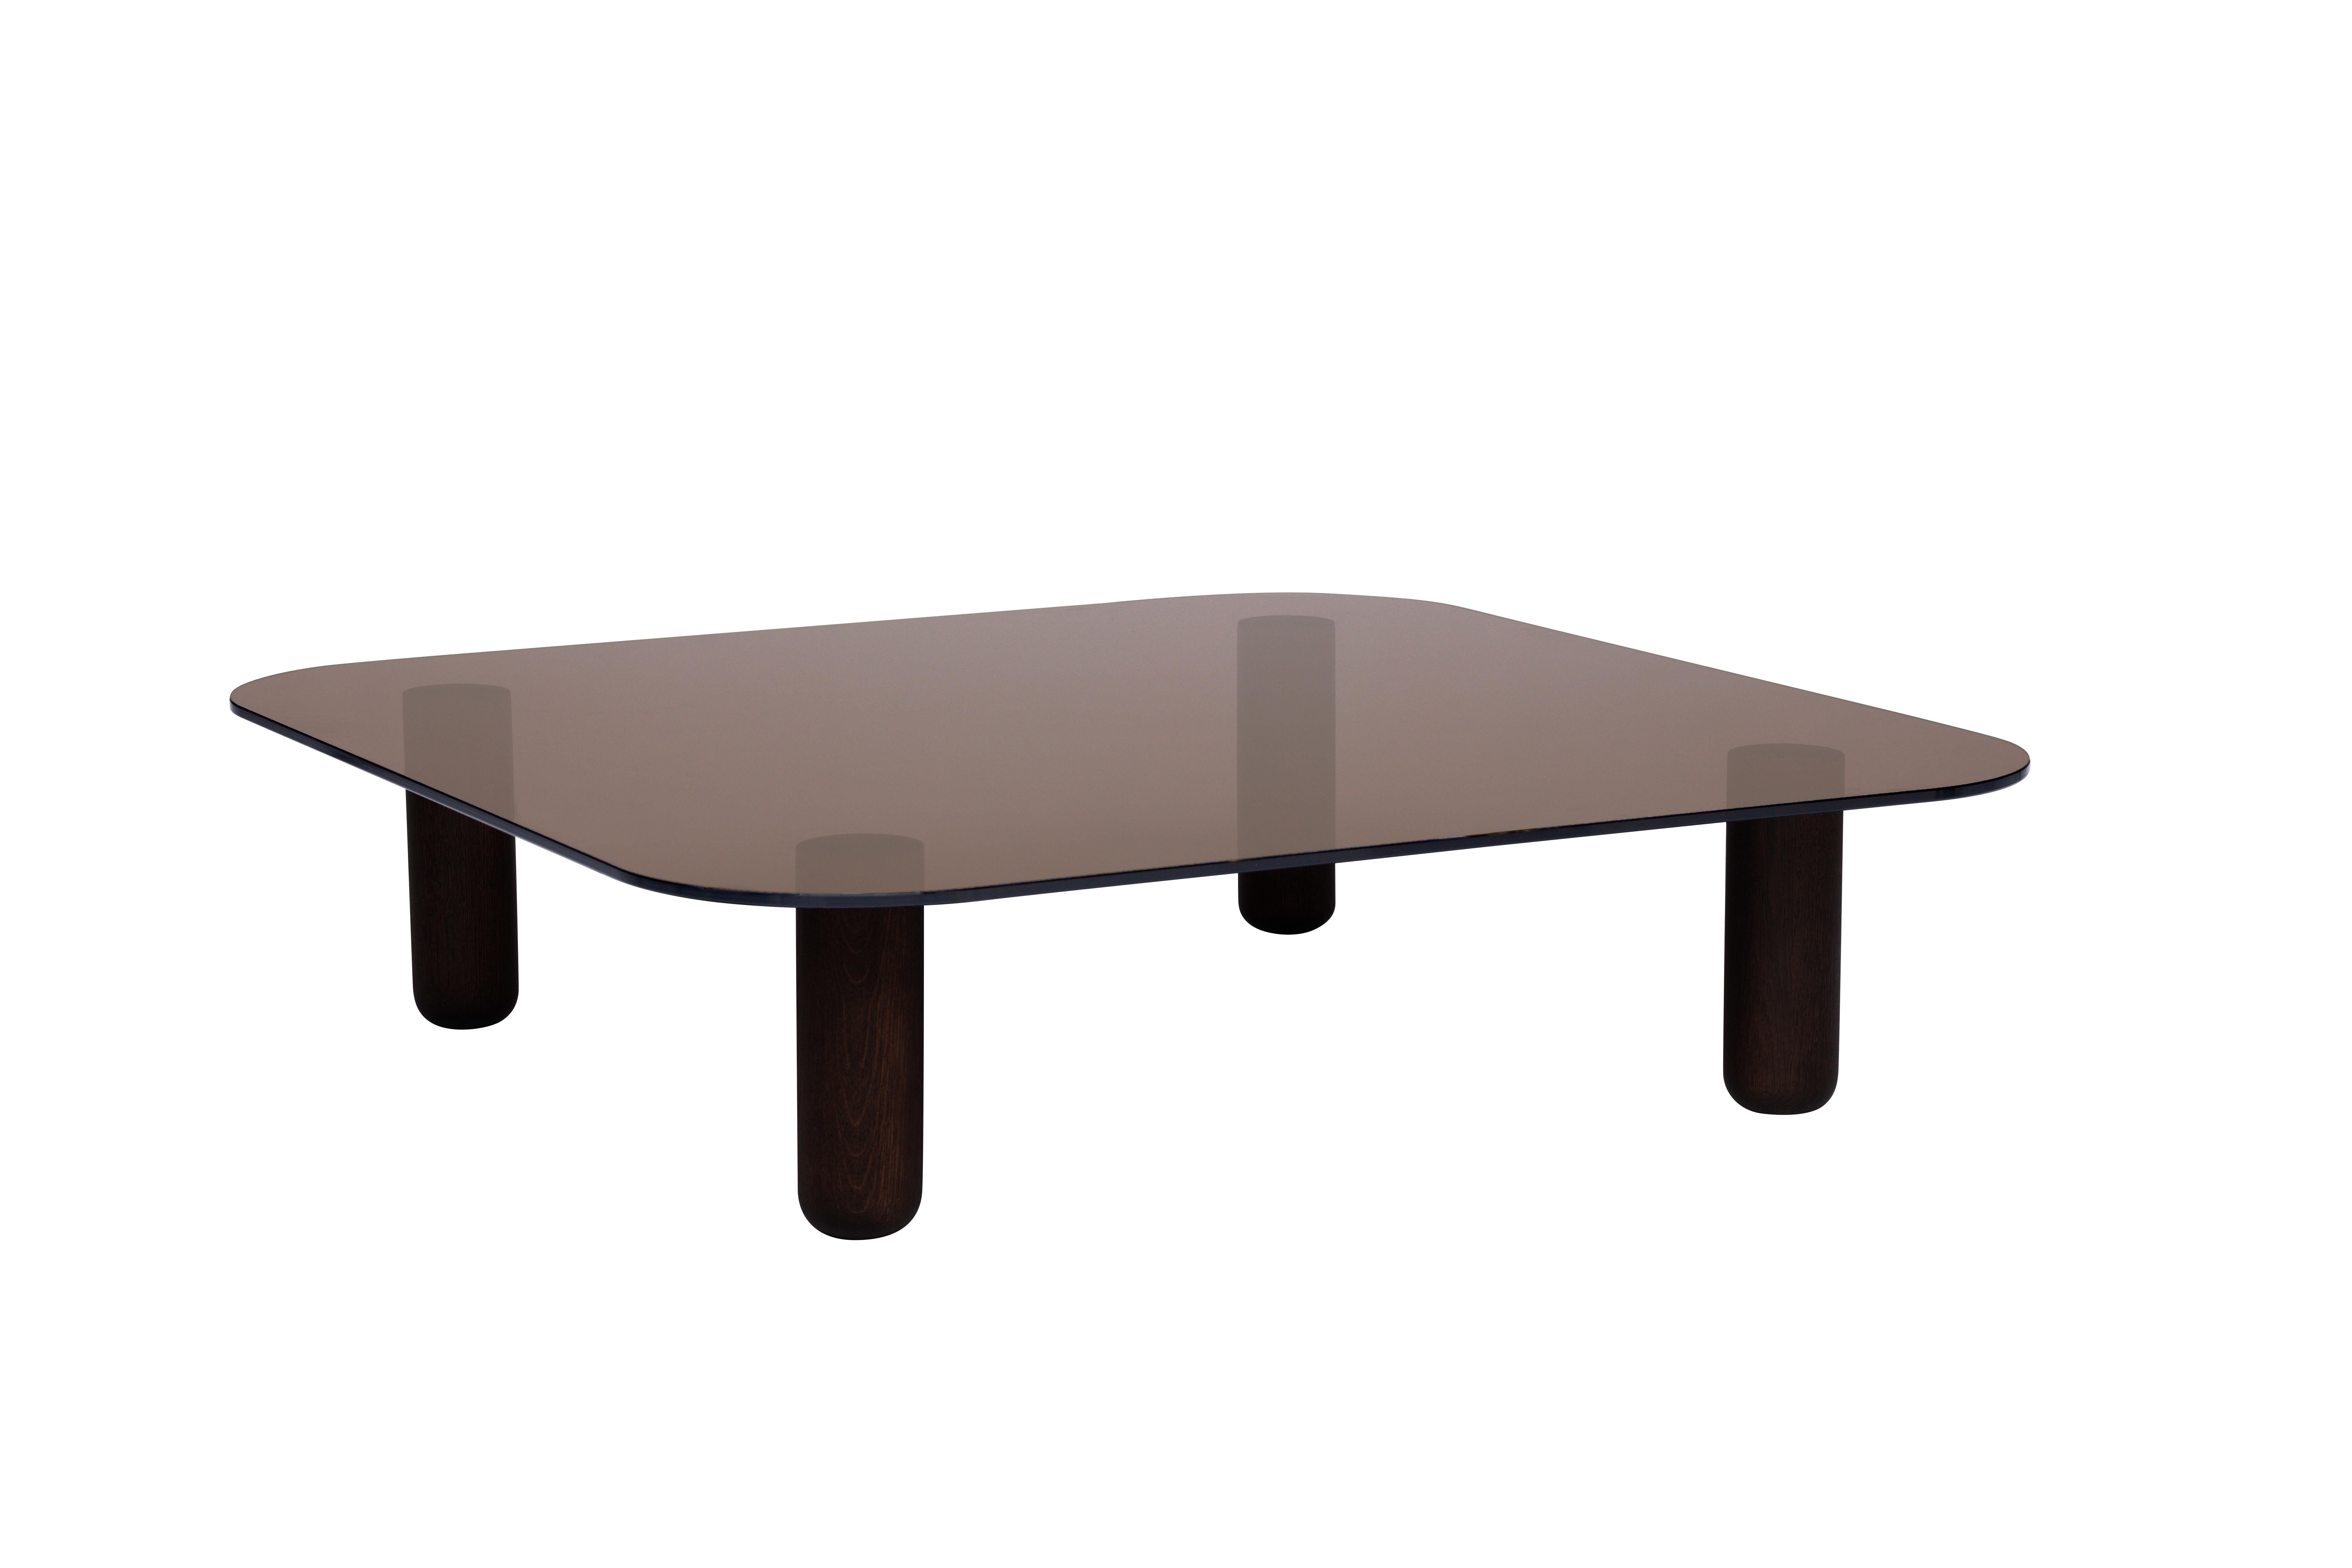 Polish Big Sur Low Table by Fogia, Brown Glass, Wenge Legs For Sale